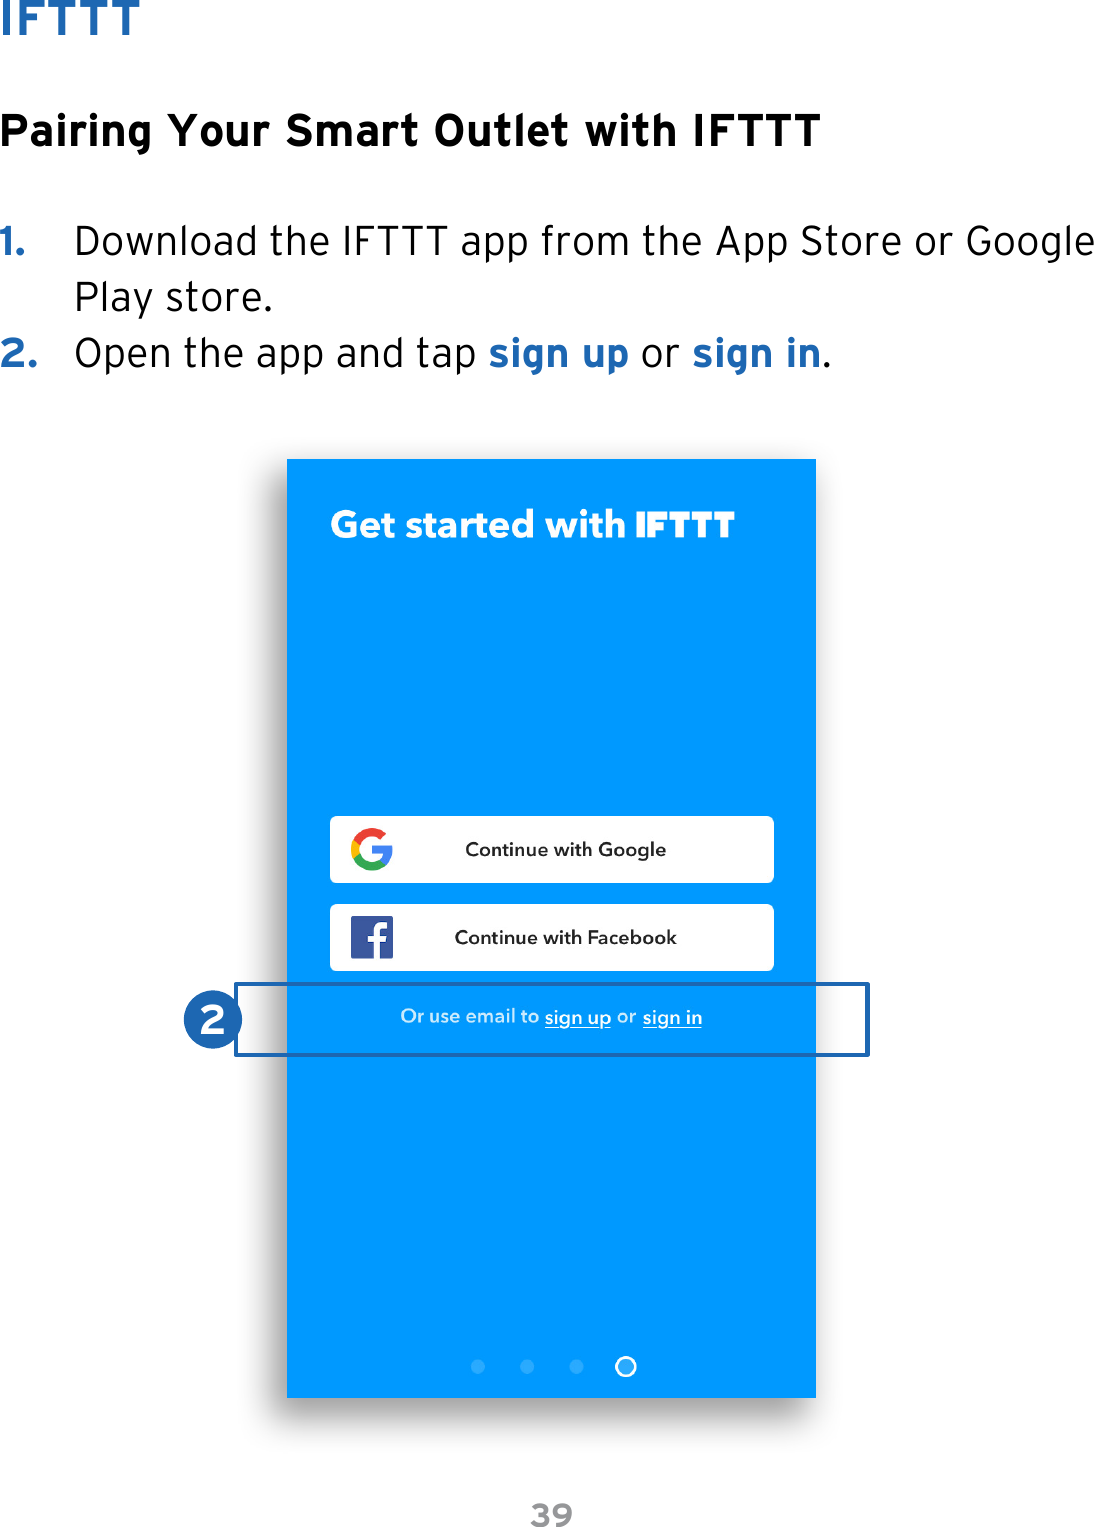 39IFTTTPairing Your Smart Outlet with IFTTT1.  Download the IFTTT app from the App Store or Google Play store.2.  Open the app and tap sign up or sign in.2